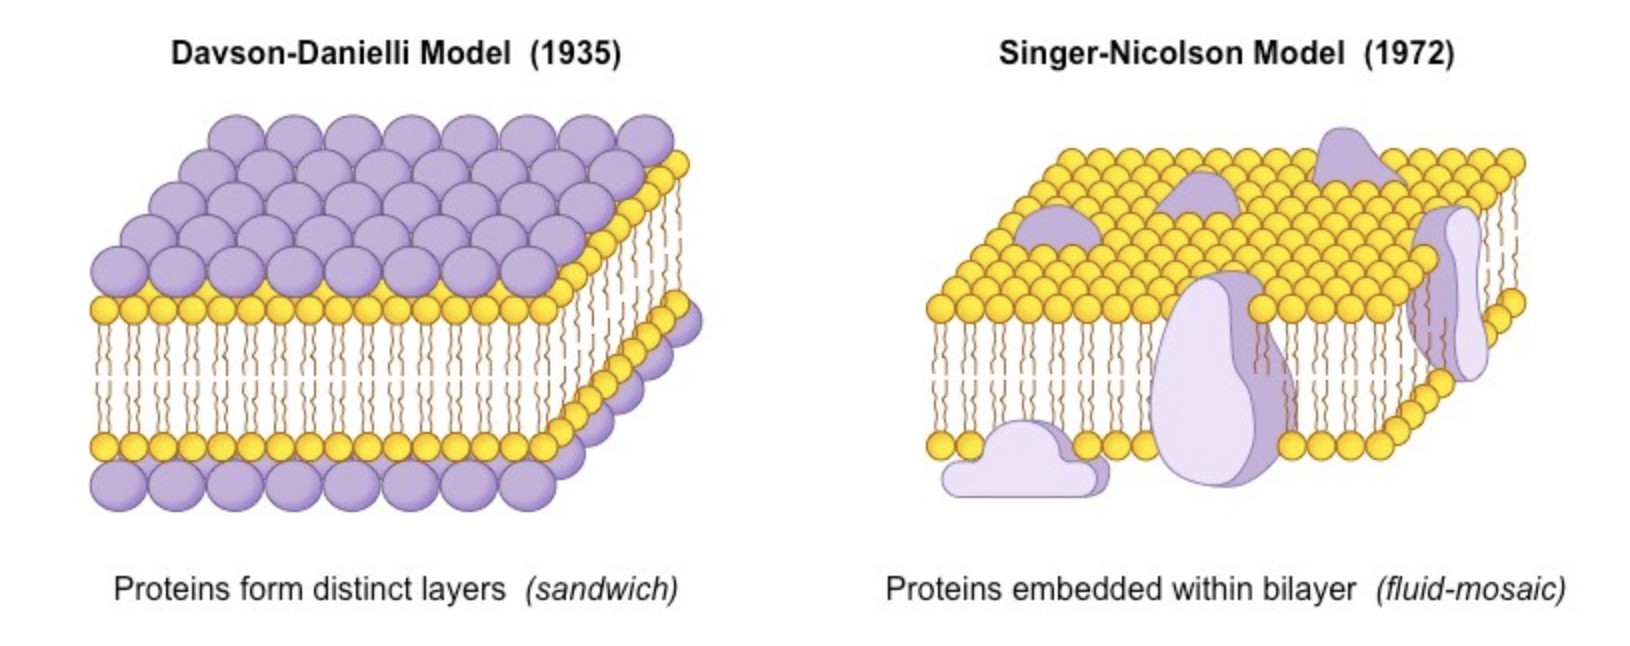 <p>The limitations found in the Davson-Danielli Model allowed for new understandings to be applied in the new Singer-Nicolson Model proposed in 1972</p><ul><li><p><span>According to this model, proteins were embedded within the lipid bilayer rather than existing as separate layers</span></p><ul><li><p>Addresses the problems and limitations found in the Davson-Danielli Model</p></li></ul></li></ul><p>This fluid-mosaic model remains the model preferred by scientists today (with refinements)</p>